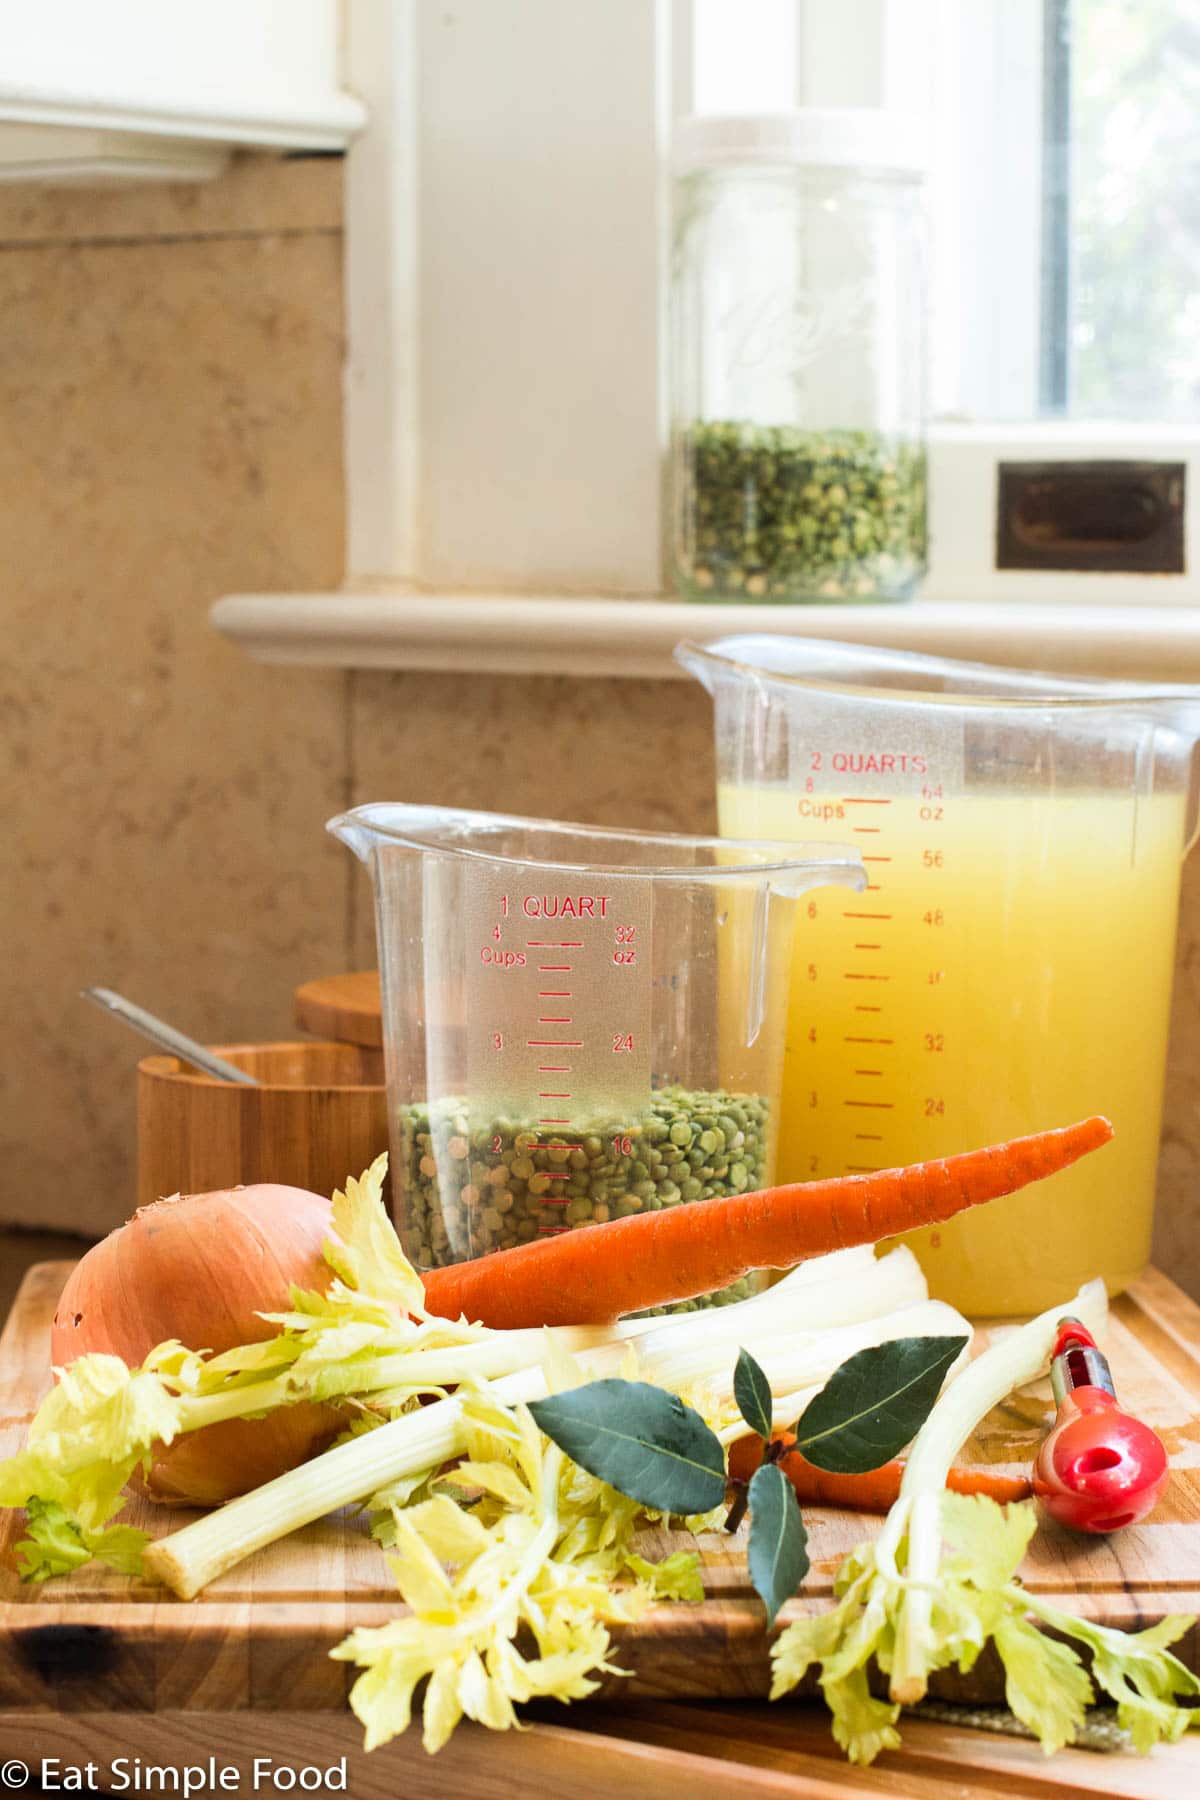 Ingredients on a wood cutting board: bay leaves, celery with leaves, onion, carrot, split peas in a measuring cup and broth in a measuring cup.